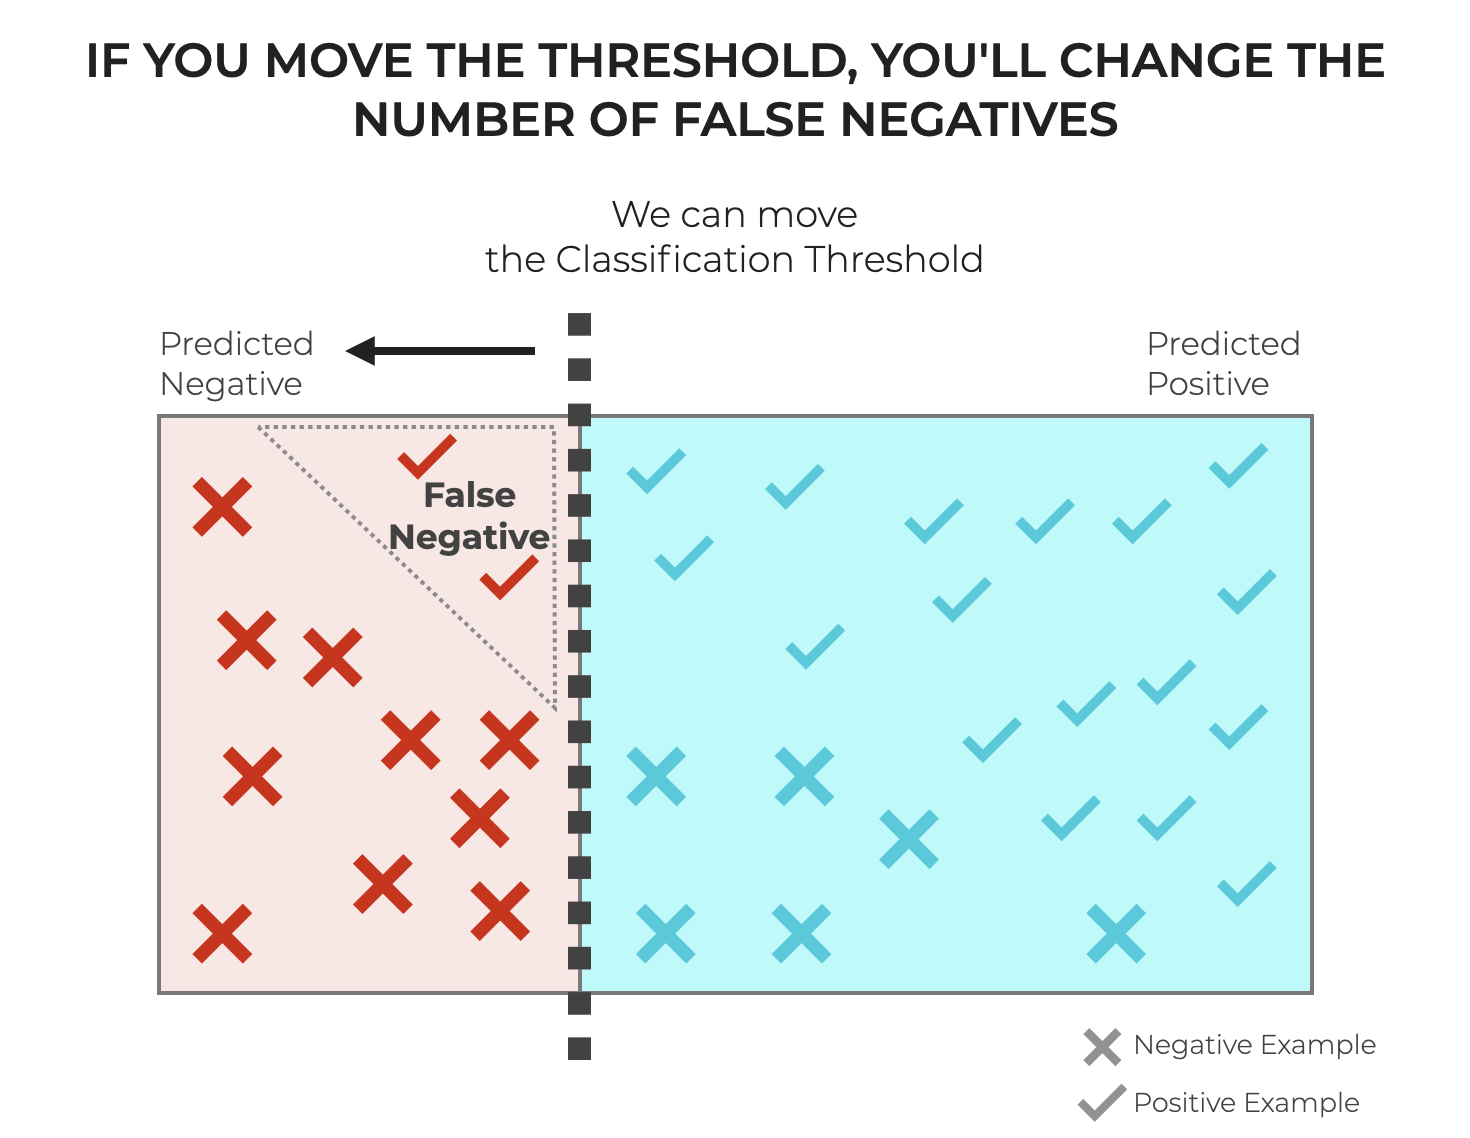 An image that shows how if we move the classification threshold, we'll change the number of False Negatives.